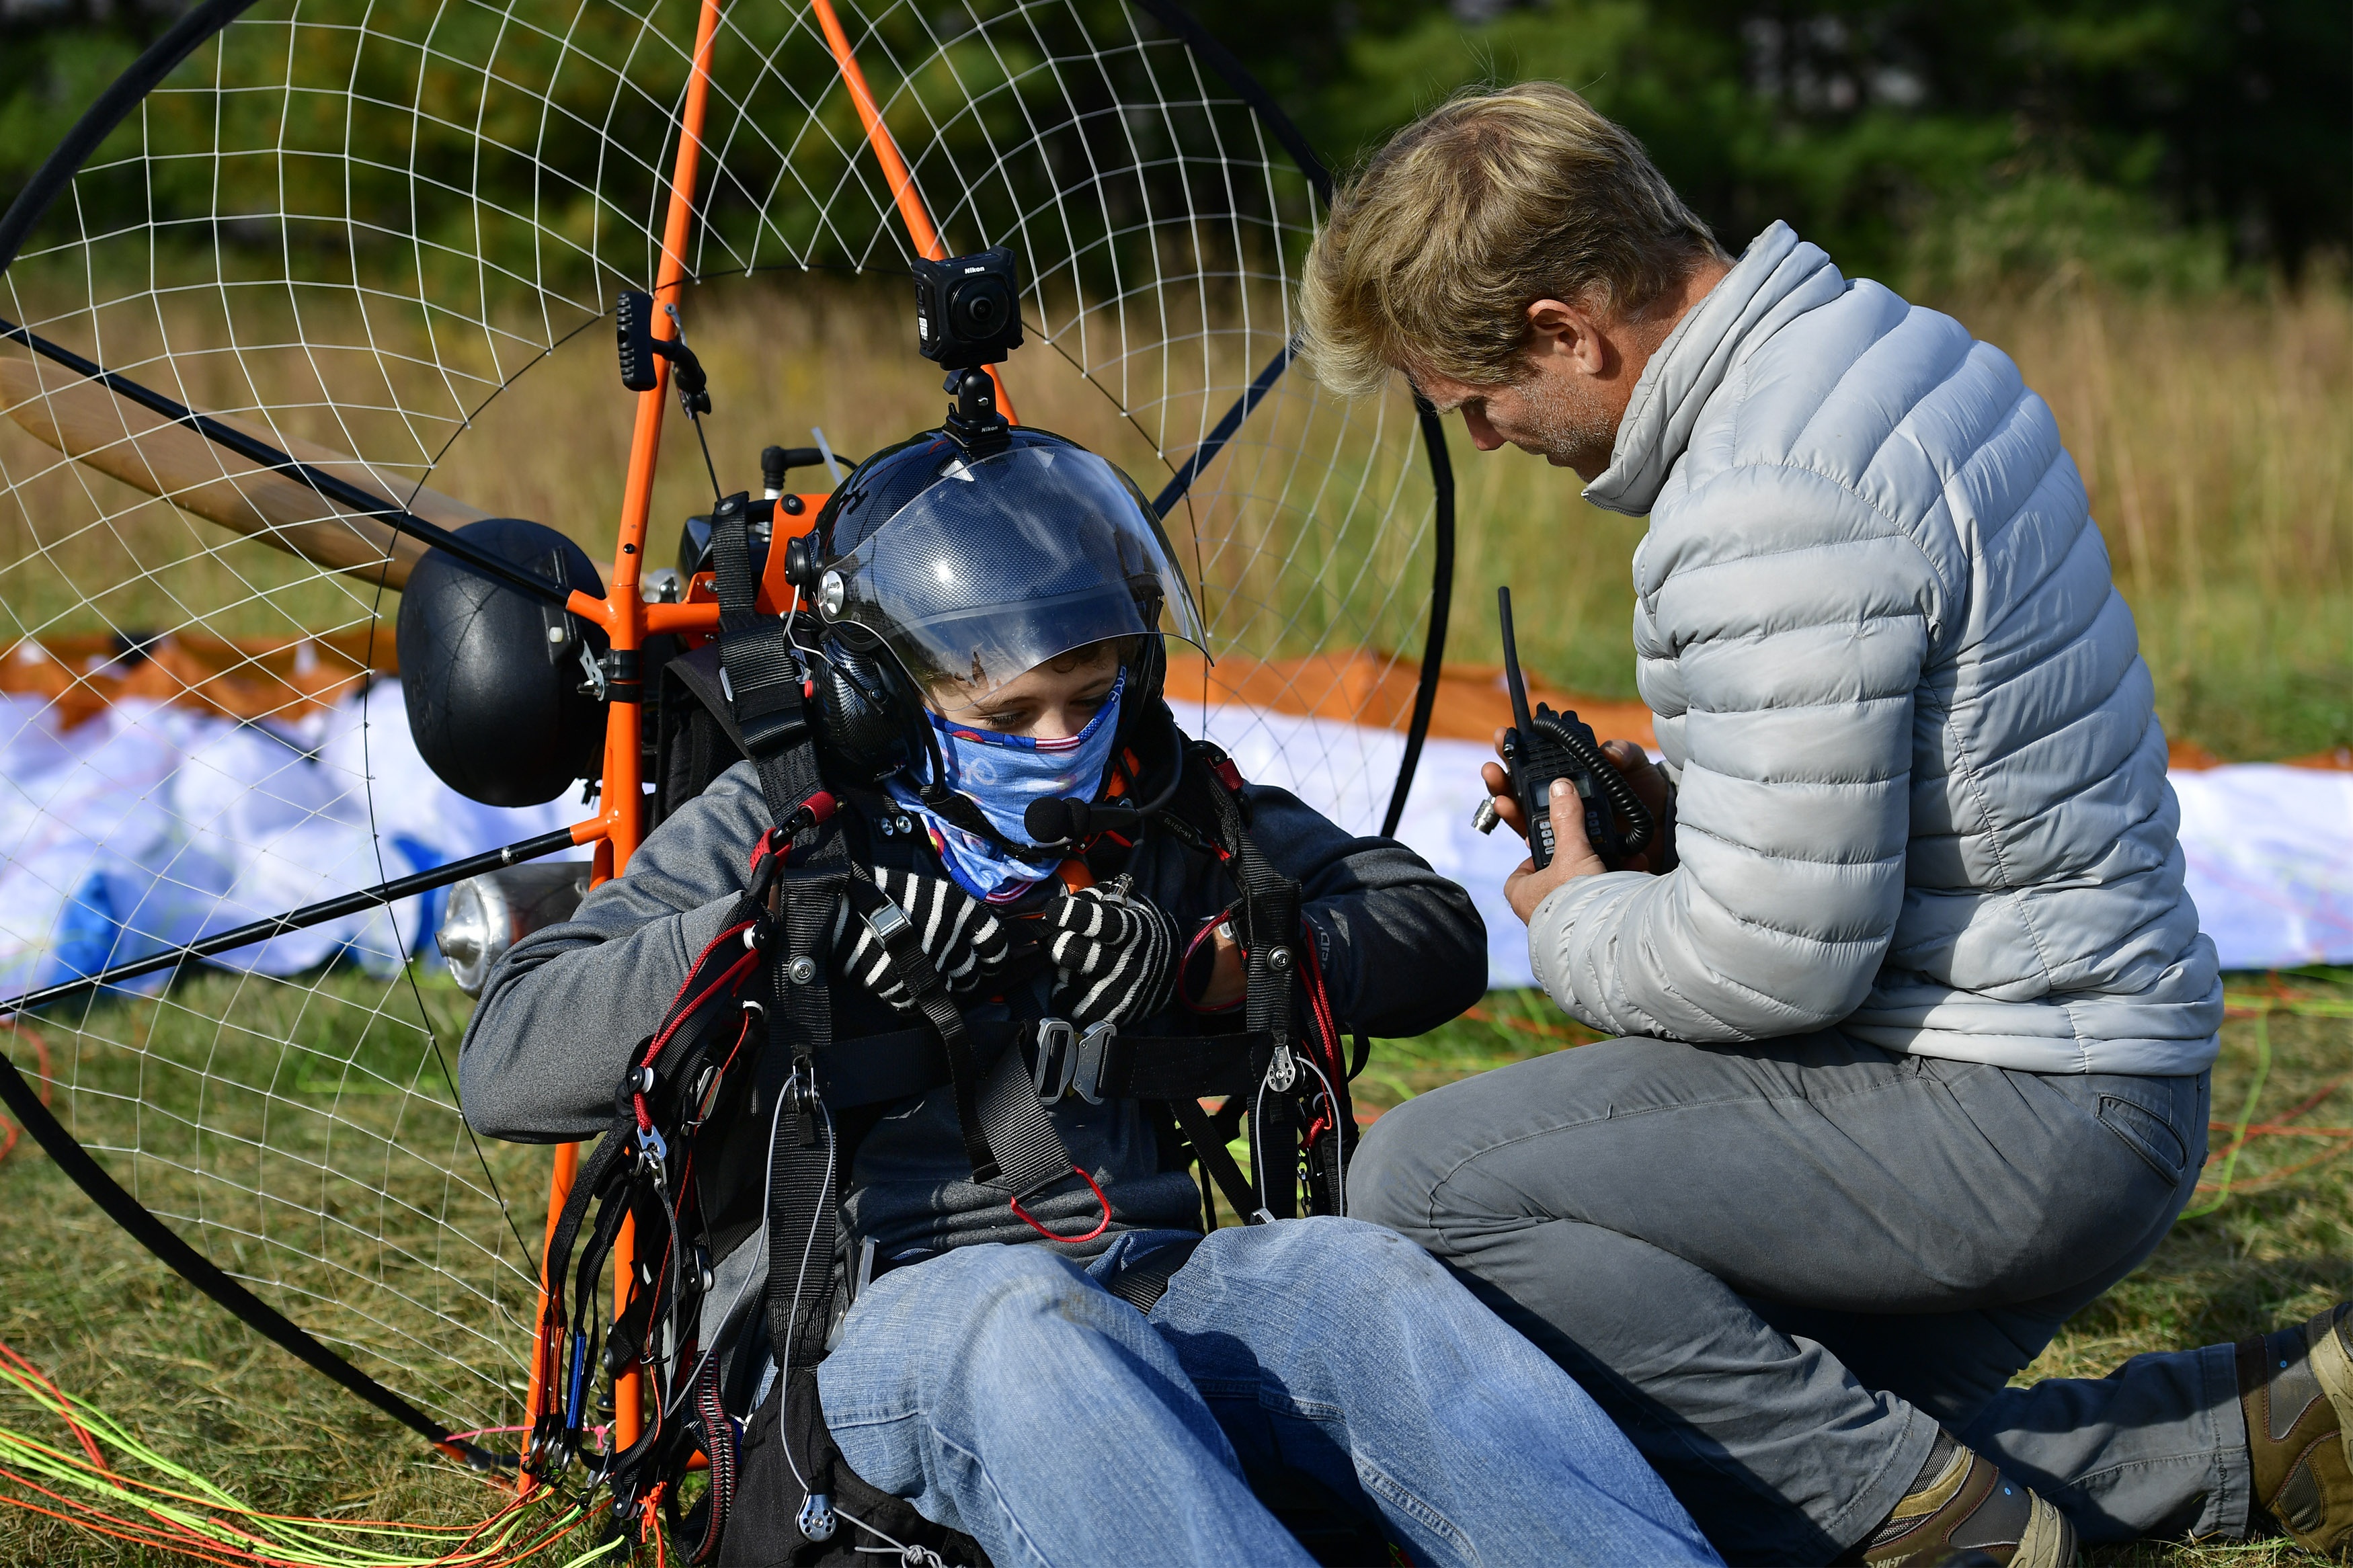 Powered paraglider pilot Henry Scott and his father, Jens, prepare for a powered paragliding flight from a grass strip in Lovettsville, Virginia. Photo by David Tulis.